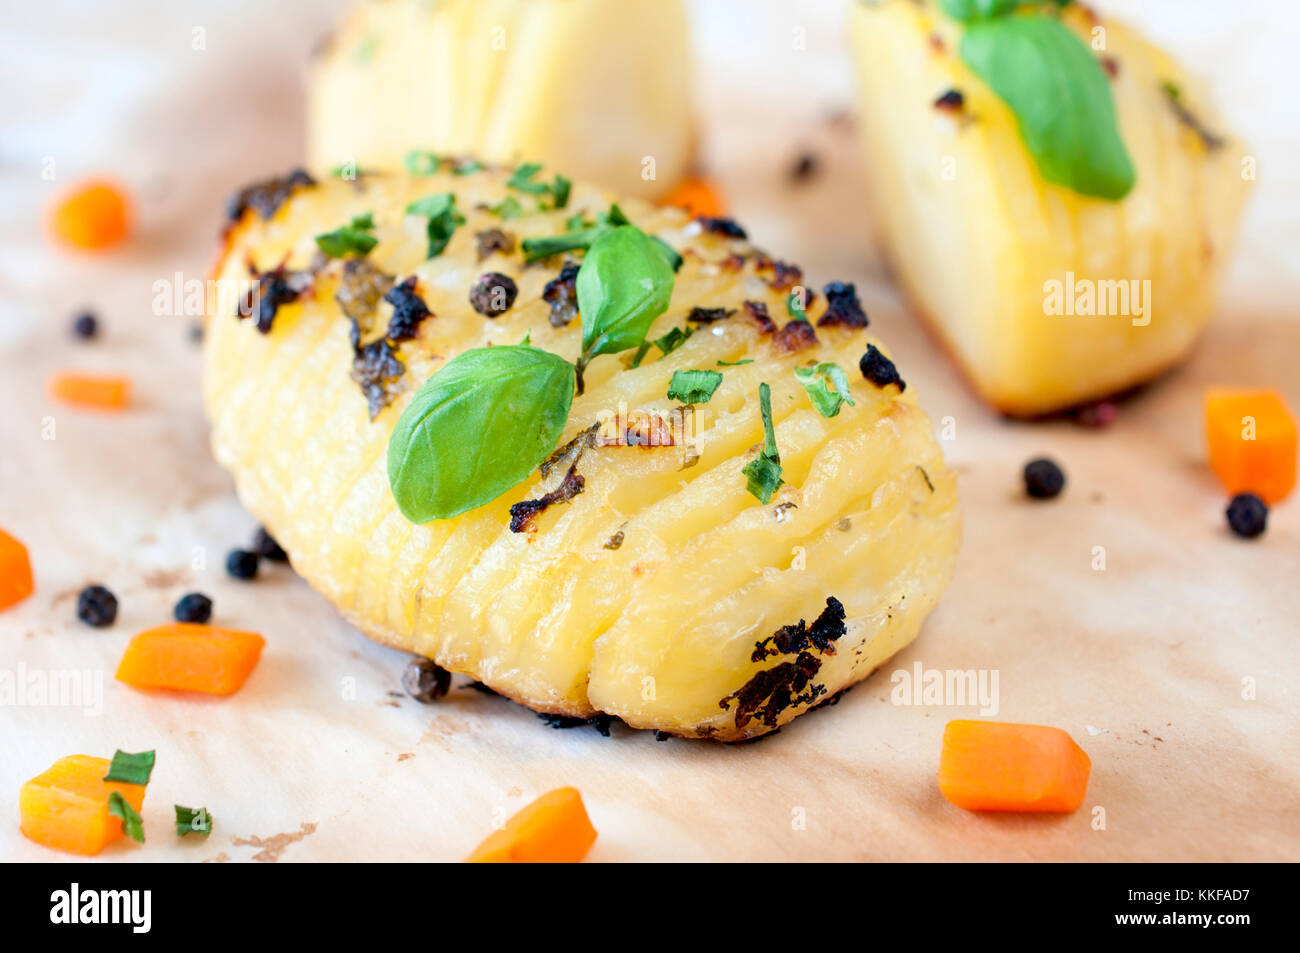 Baked potatoe with chive and sliced carrots Stock Photo